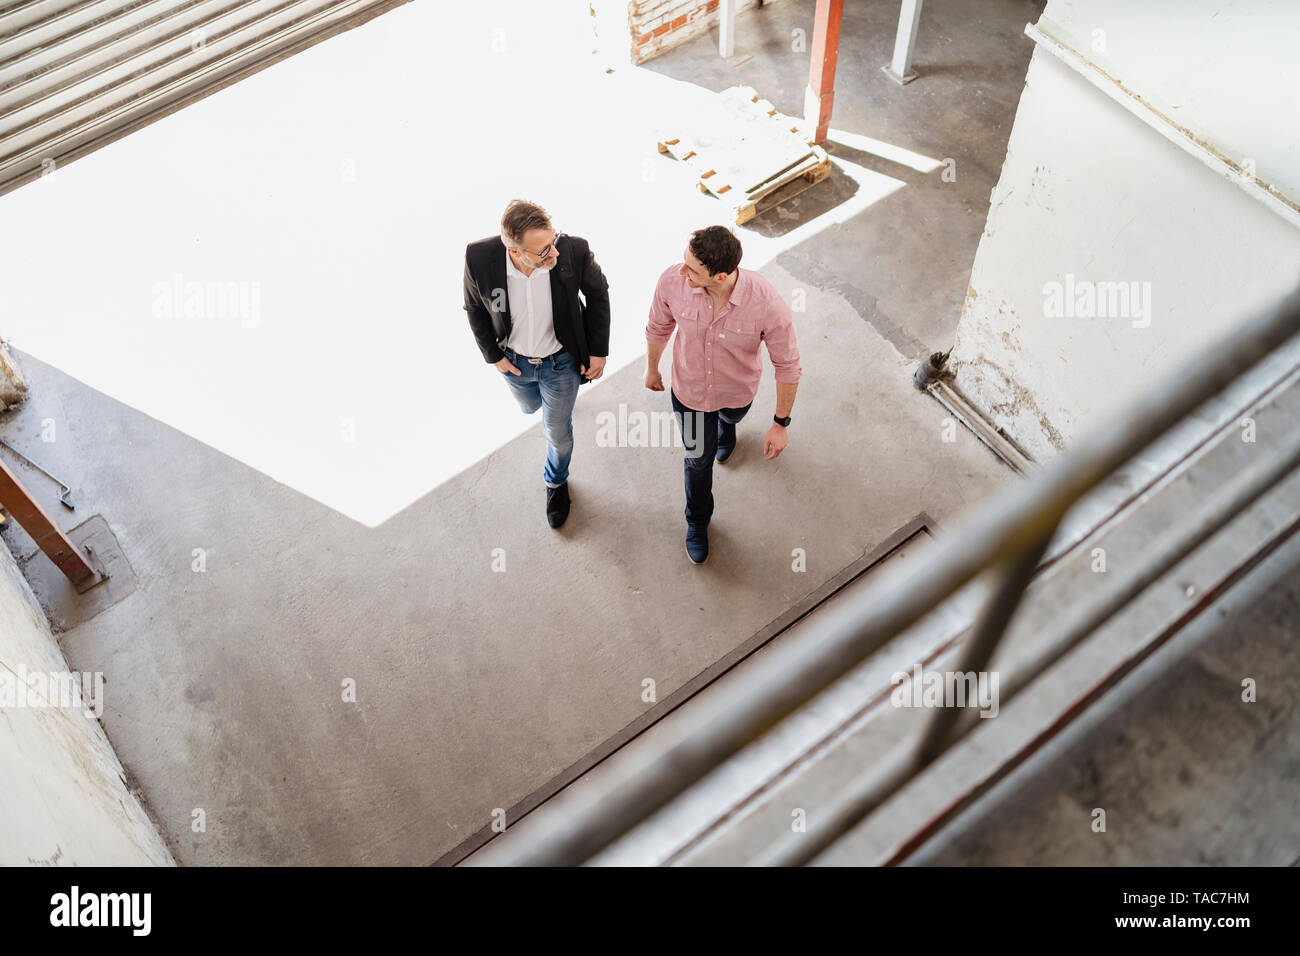 Bird's eye view of two men walking at loading bay in a factory Stock Photo